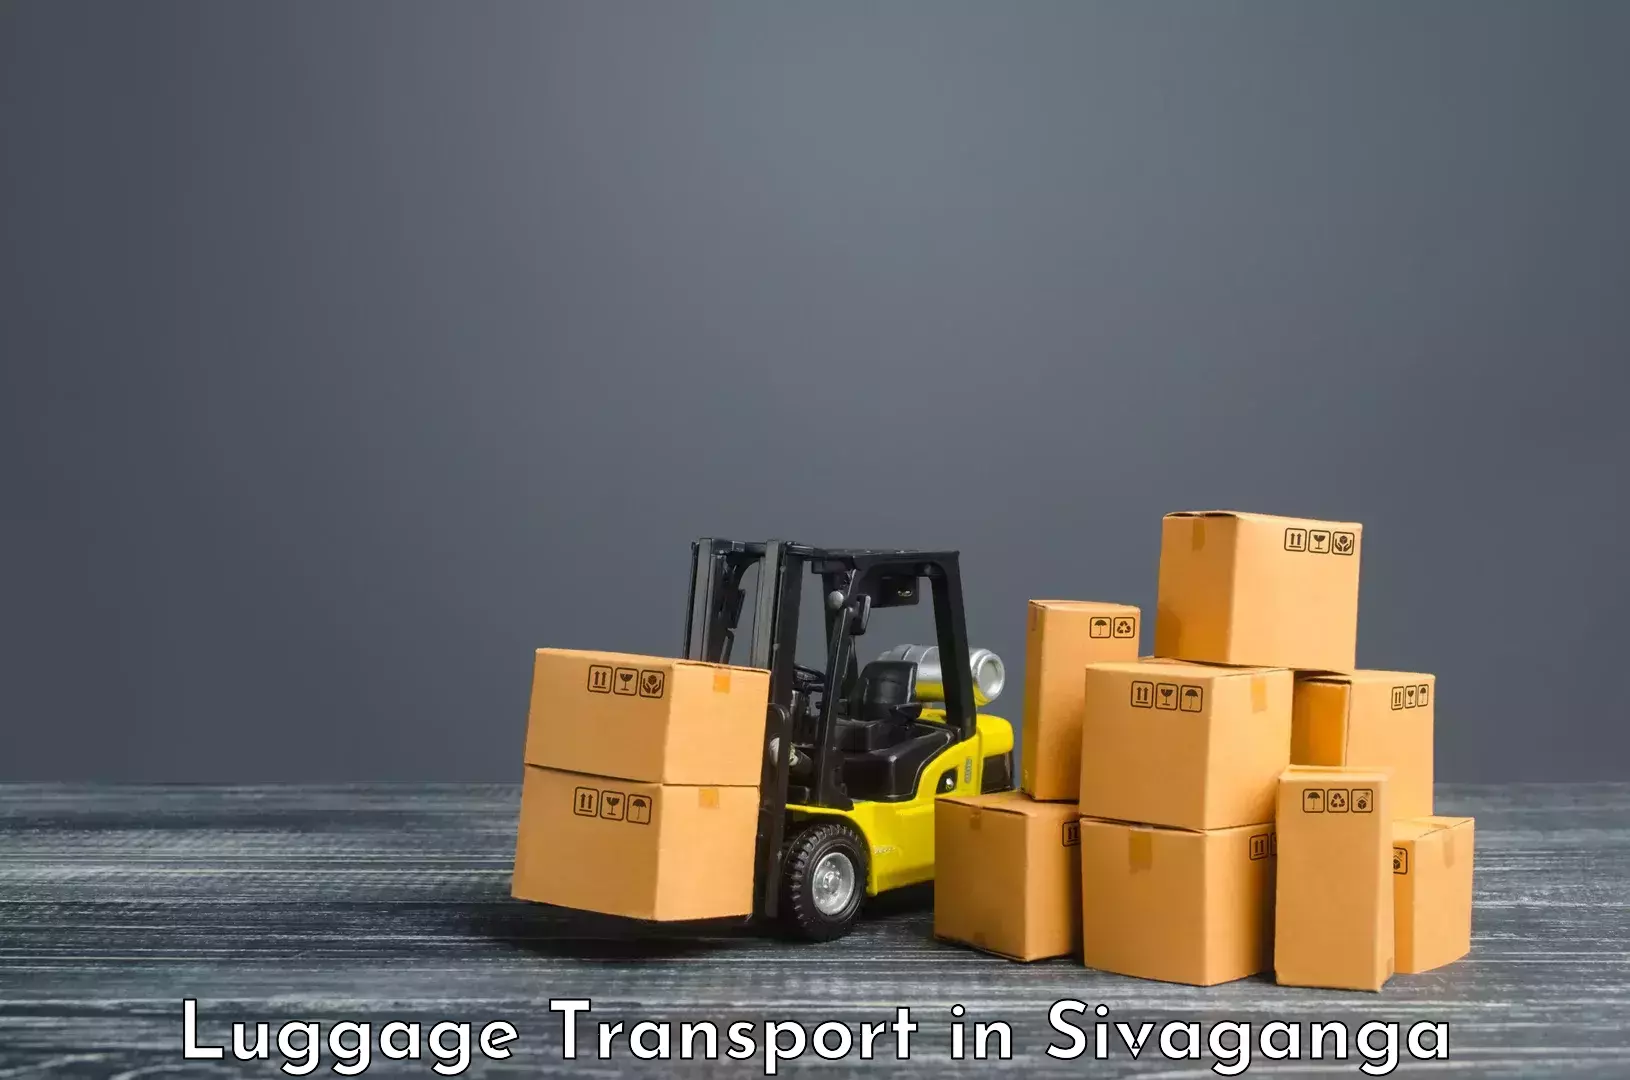 Baggage transport innovation in Sivaganga